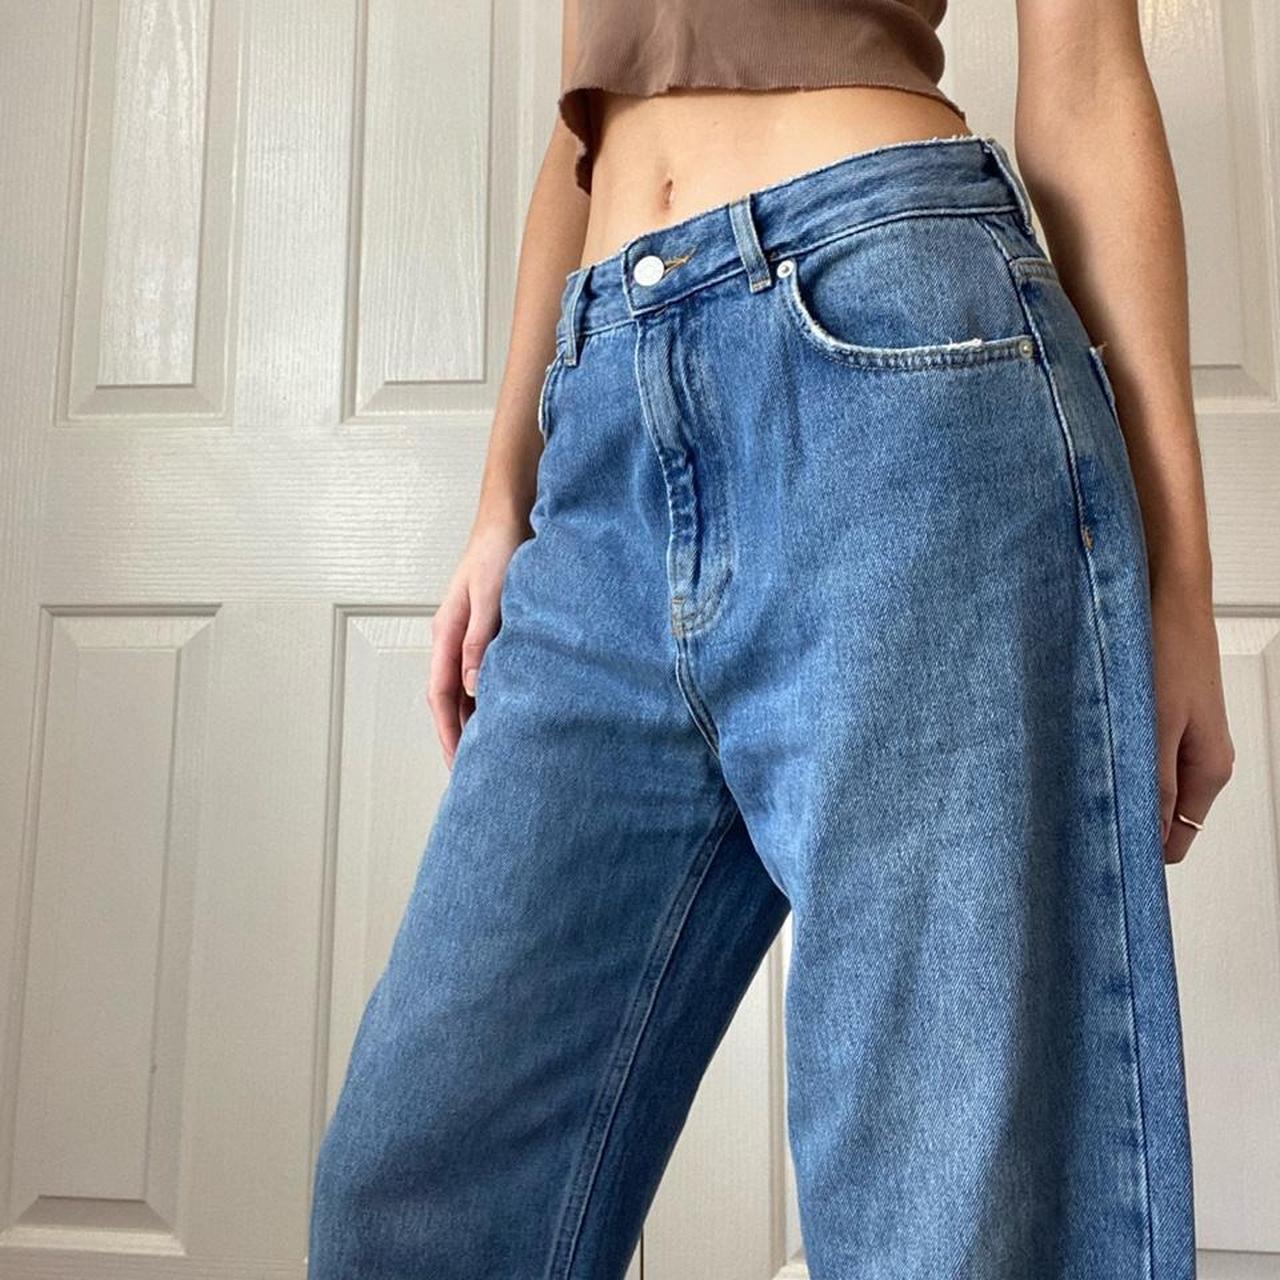 Glassons baggy denim jeans size 20. Never worn as... - Depop